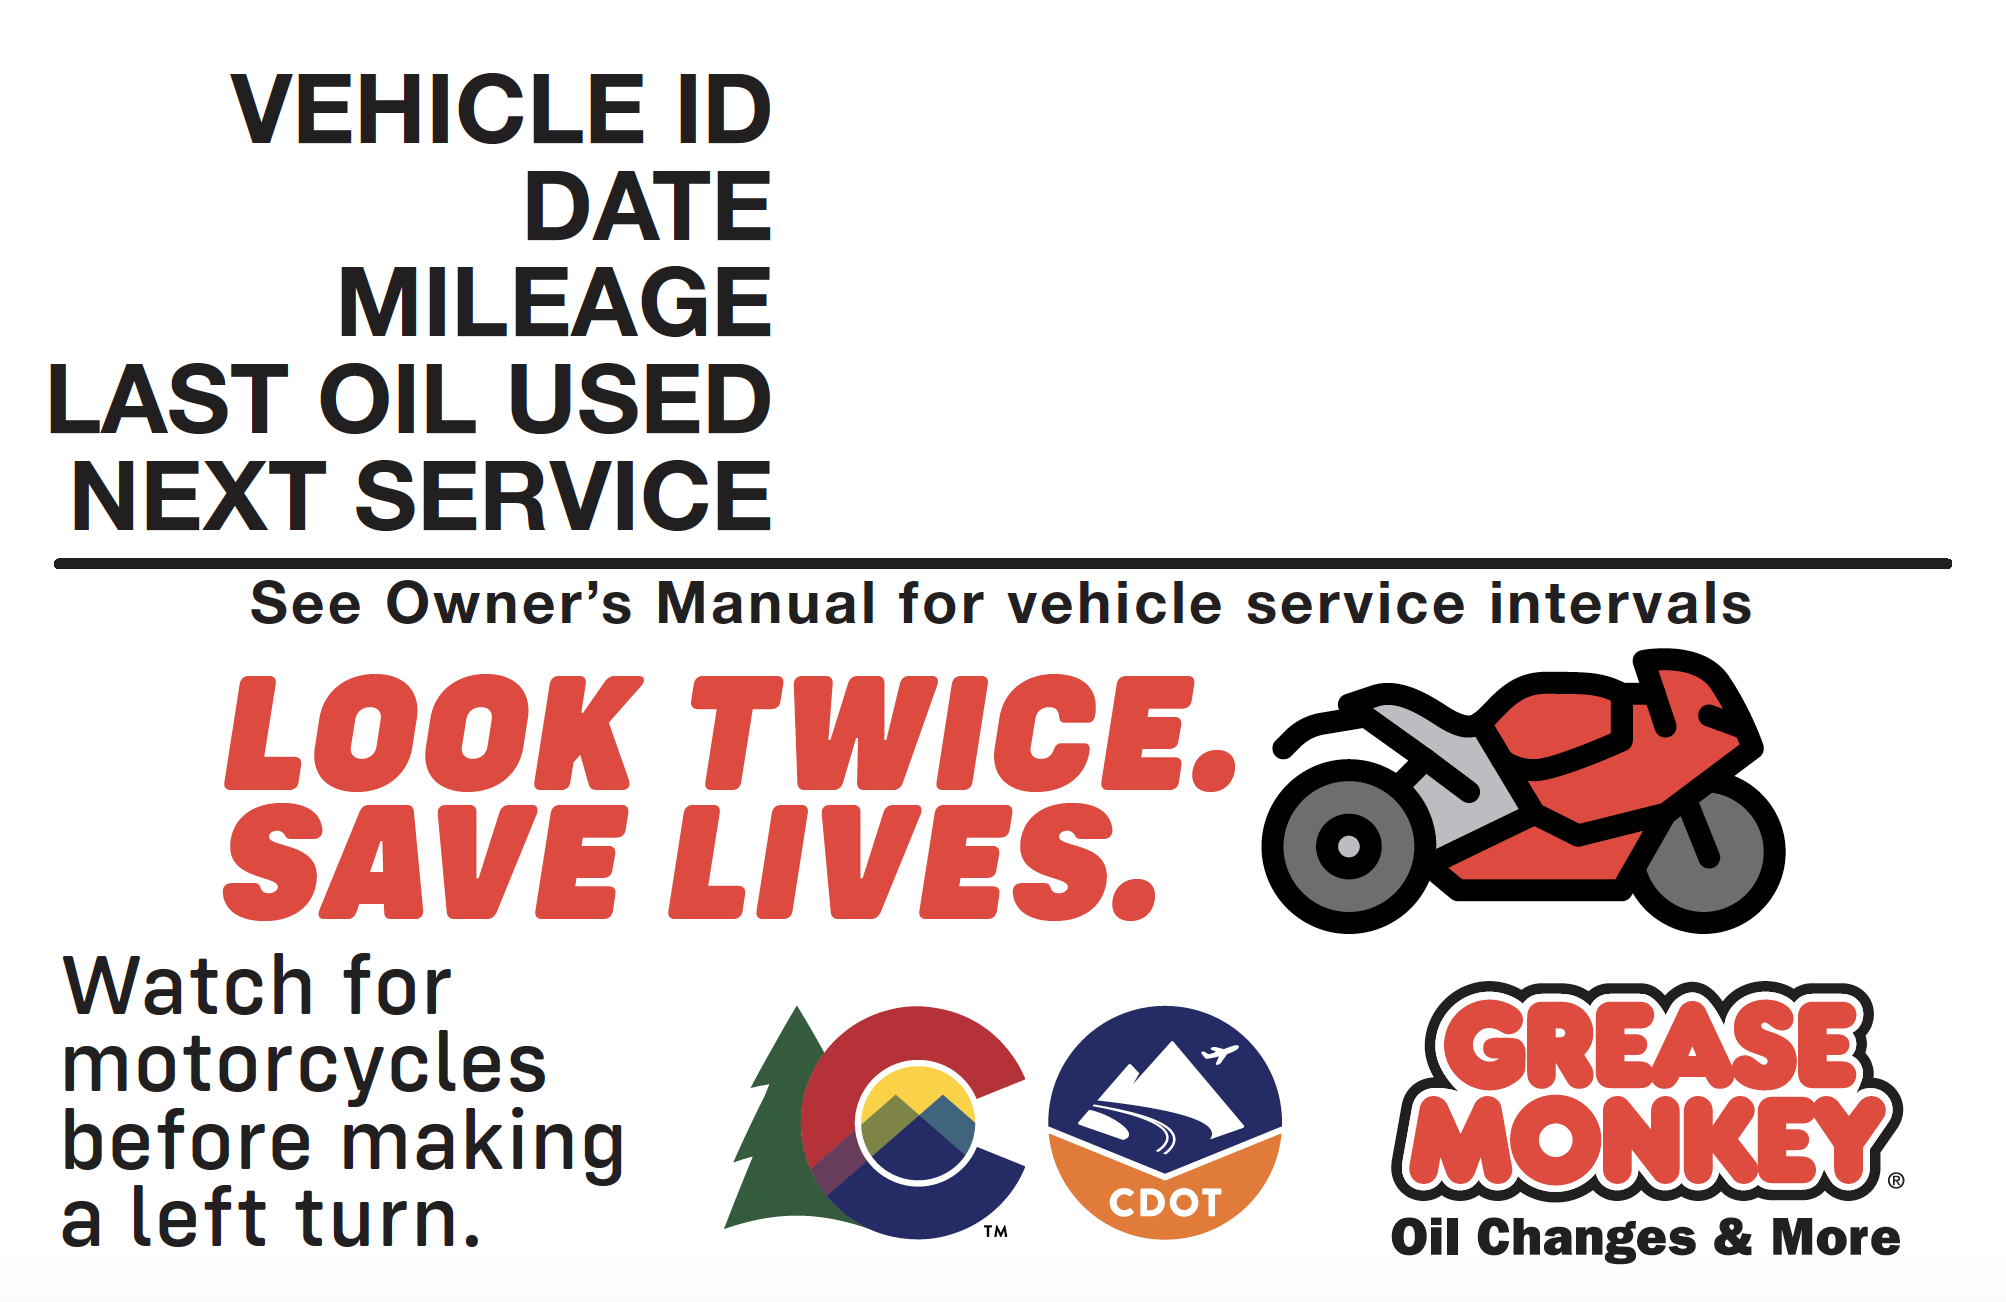 Look Twice, Save Lives Grease Monkey promotional sticker graphic detail image